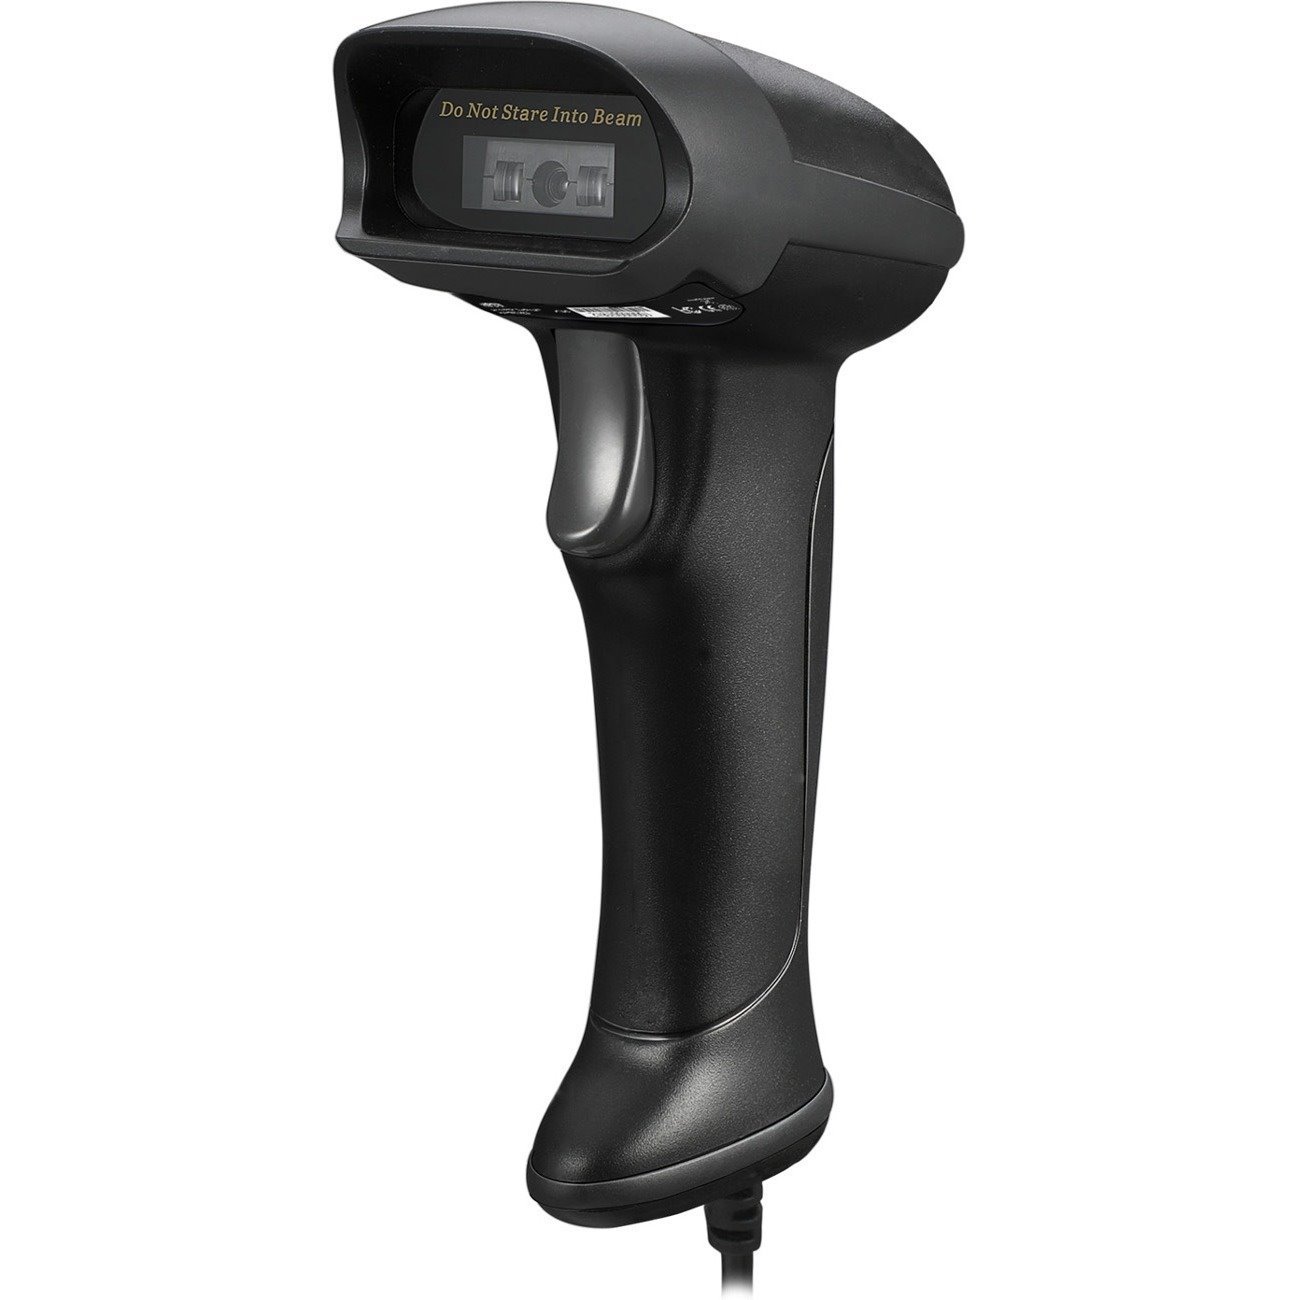 Adesso NuScan NuScan 2500CU Healthcare, Library, Retail, Warehouse Handheld Barcode Scanner - Cable Connectivity - USB Cable Included